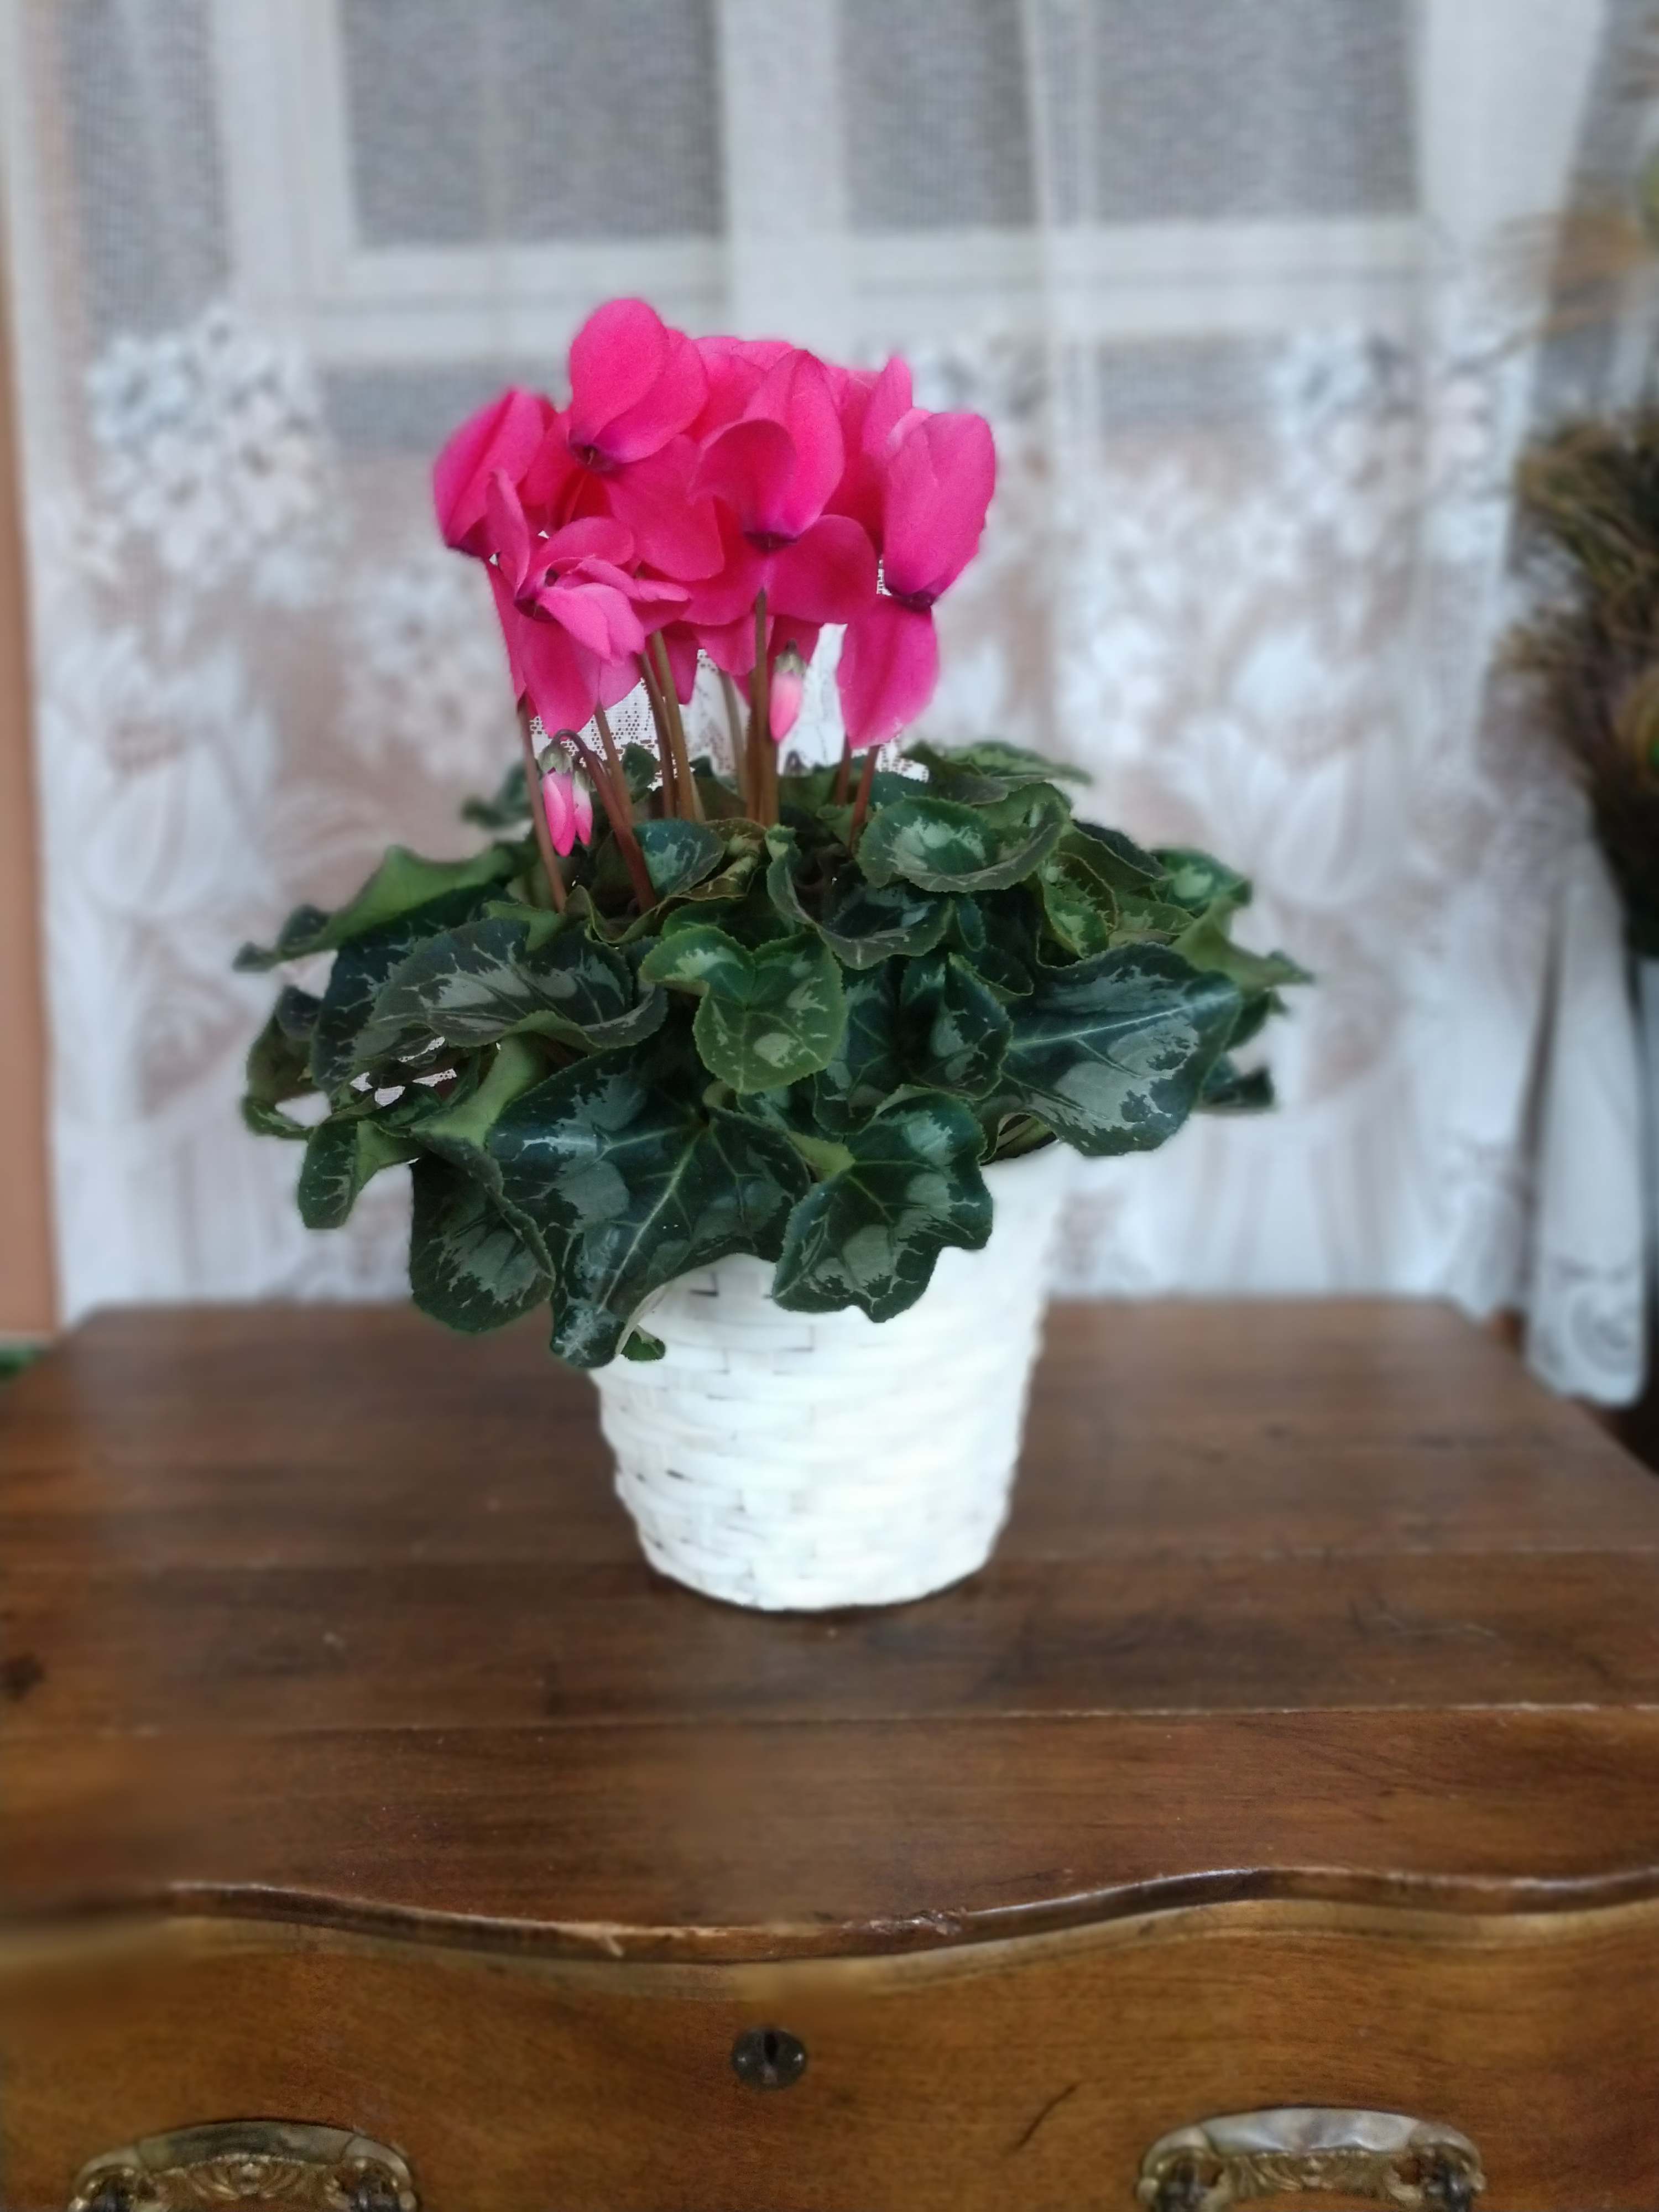 Cyclamen - This delightful flowering pot will deliver beauty for a long time. The perfectly pink blossoms almost look like birds in flight over a lovely sea of greens. Sure to be appreciated, it's a wonderful housewarming or birthday gift. Colors will vary depending upon availability.